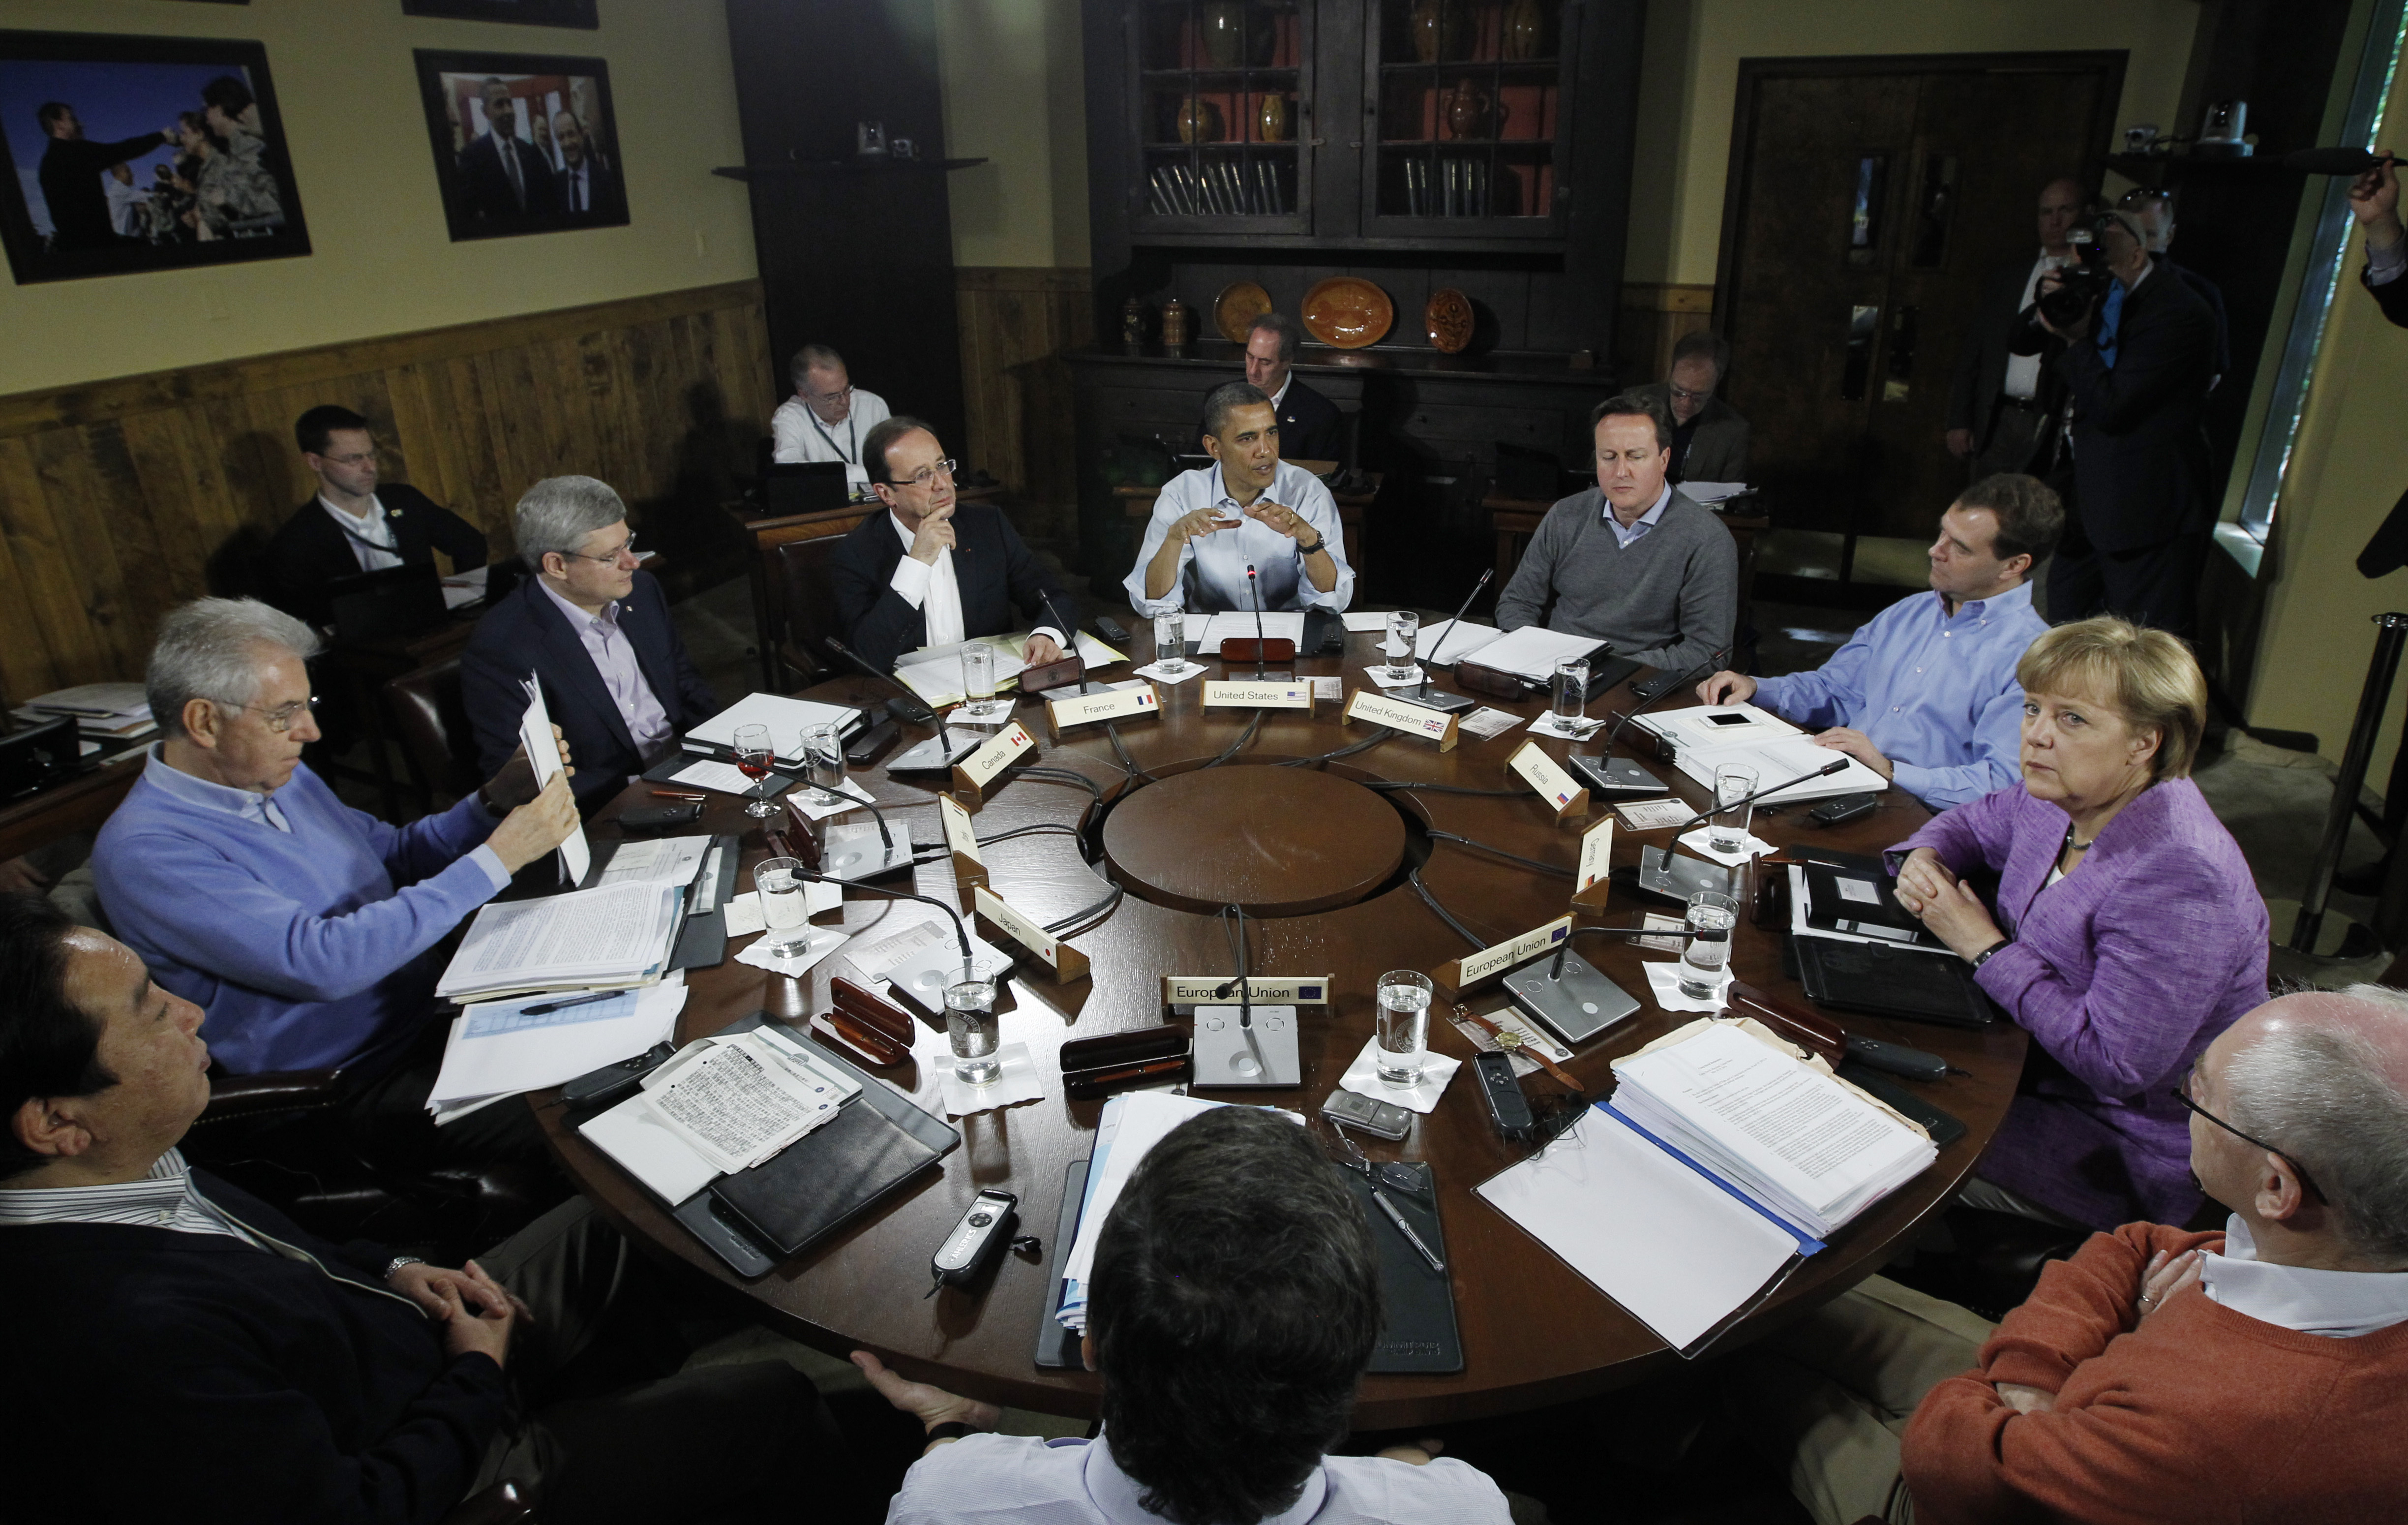 At Camp David G8 meeting, leaders "unified" on Iran CBS News